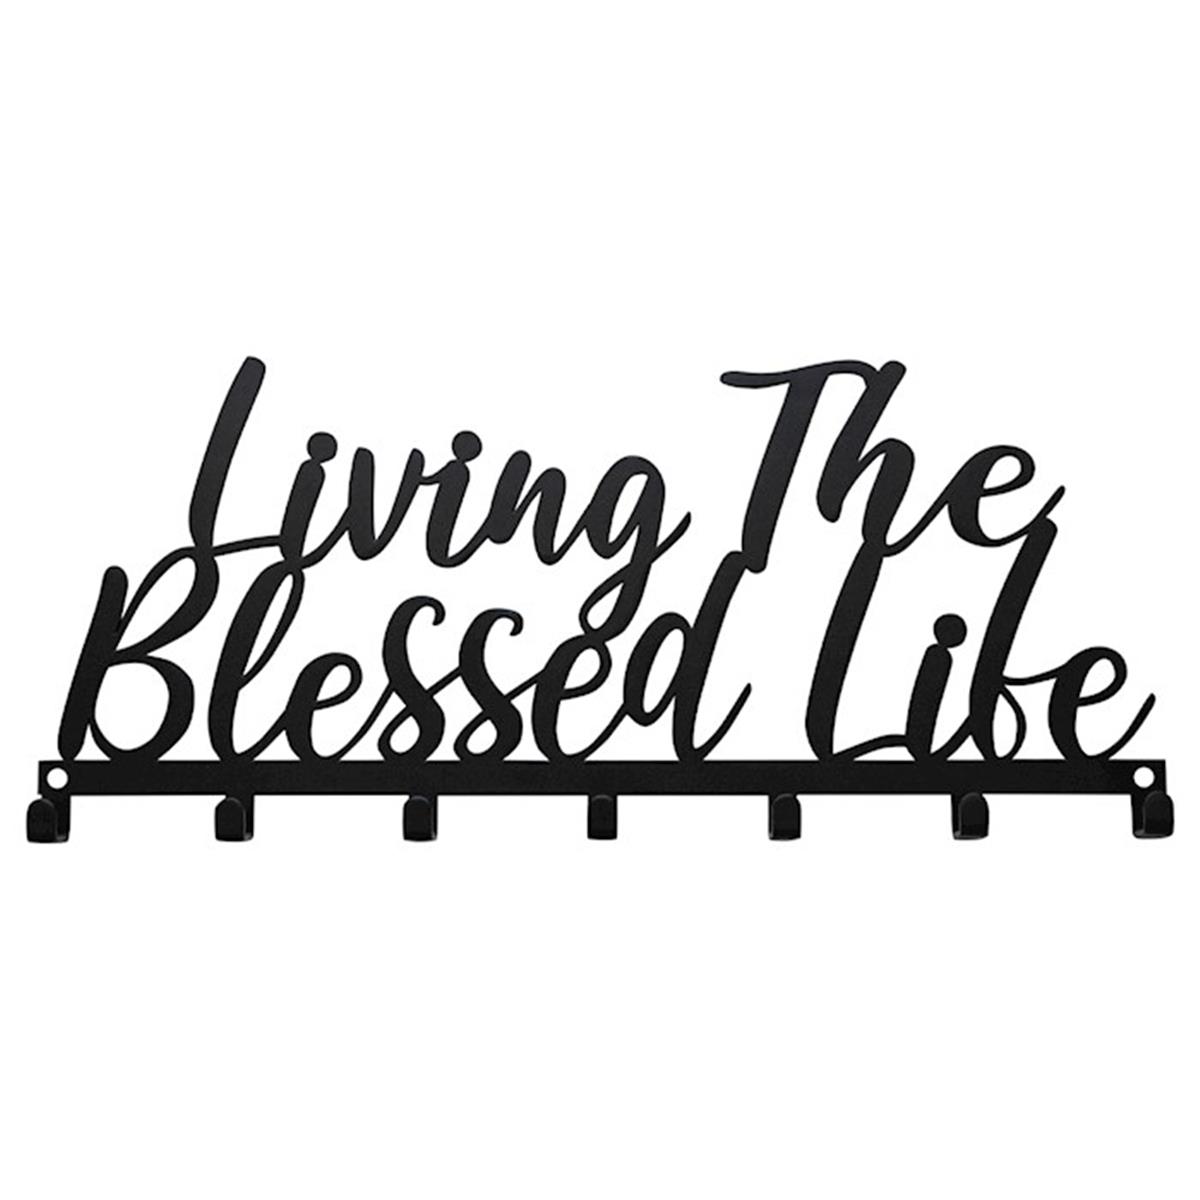 African American Expressions 212665 12 x 5.25 in. Living The Blessed Life Key Holder